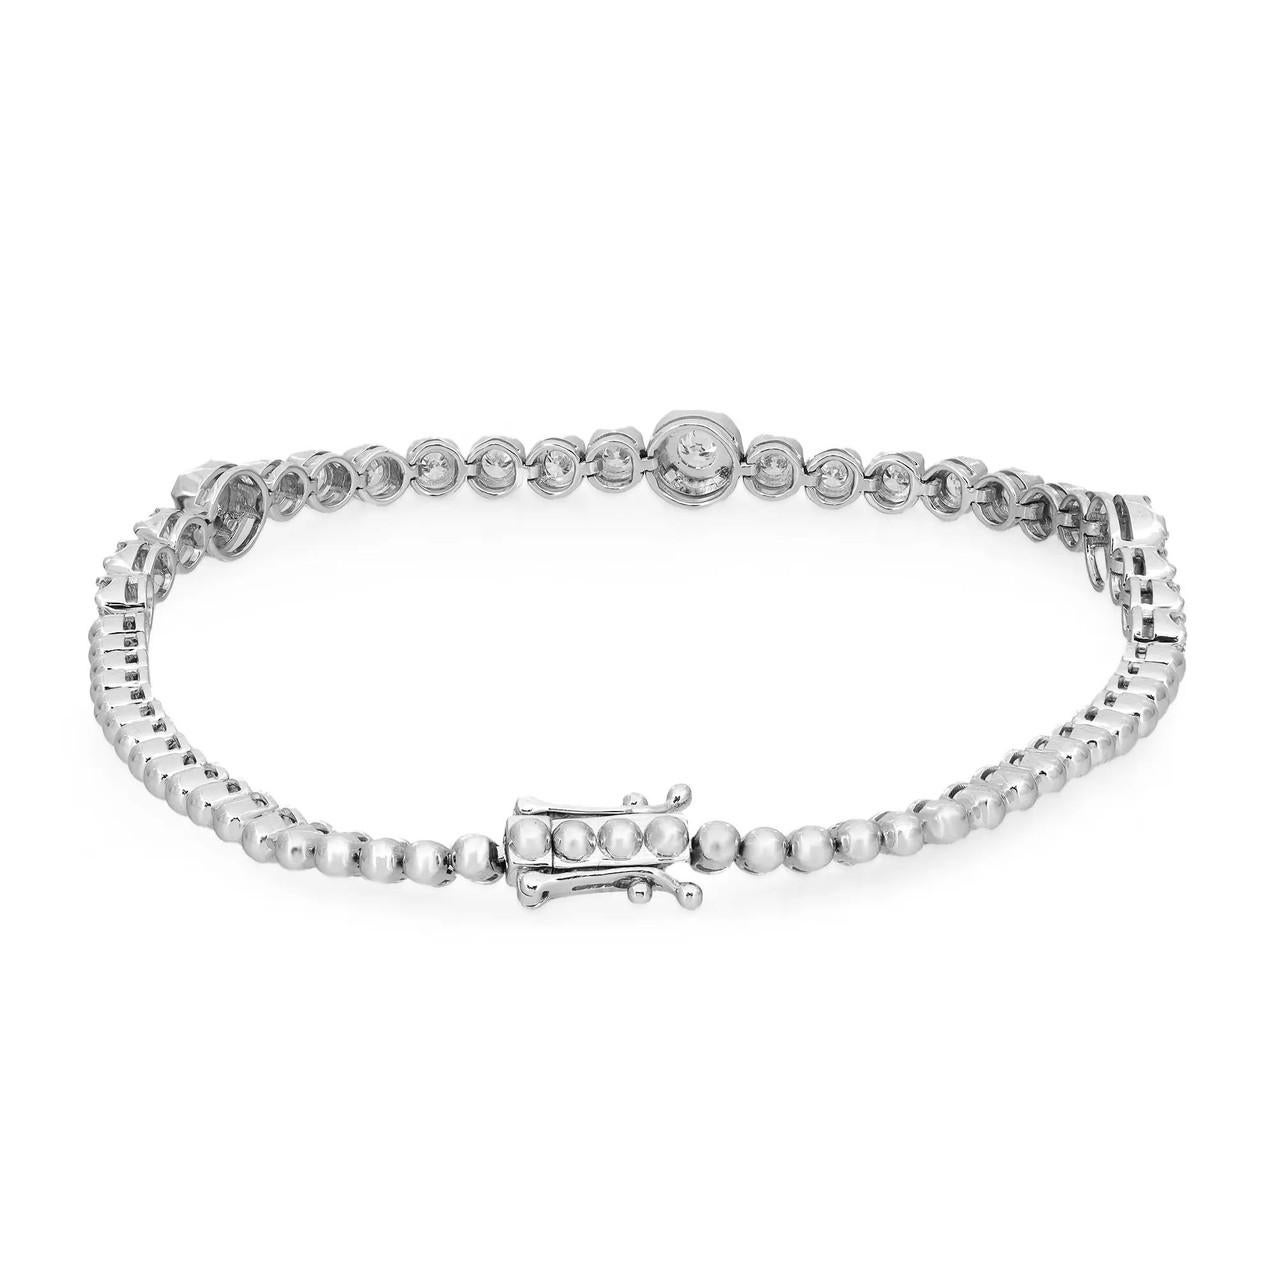 Introducing our stunning tennis bracelet, a timeless embodiment of classic elegance meticulously crafted in 18K white gold. Featuring dazzling round brilliant cut diamonds totaling 1.69 carats, with three diamonds set in prong settings for the